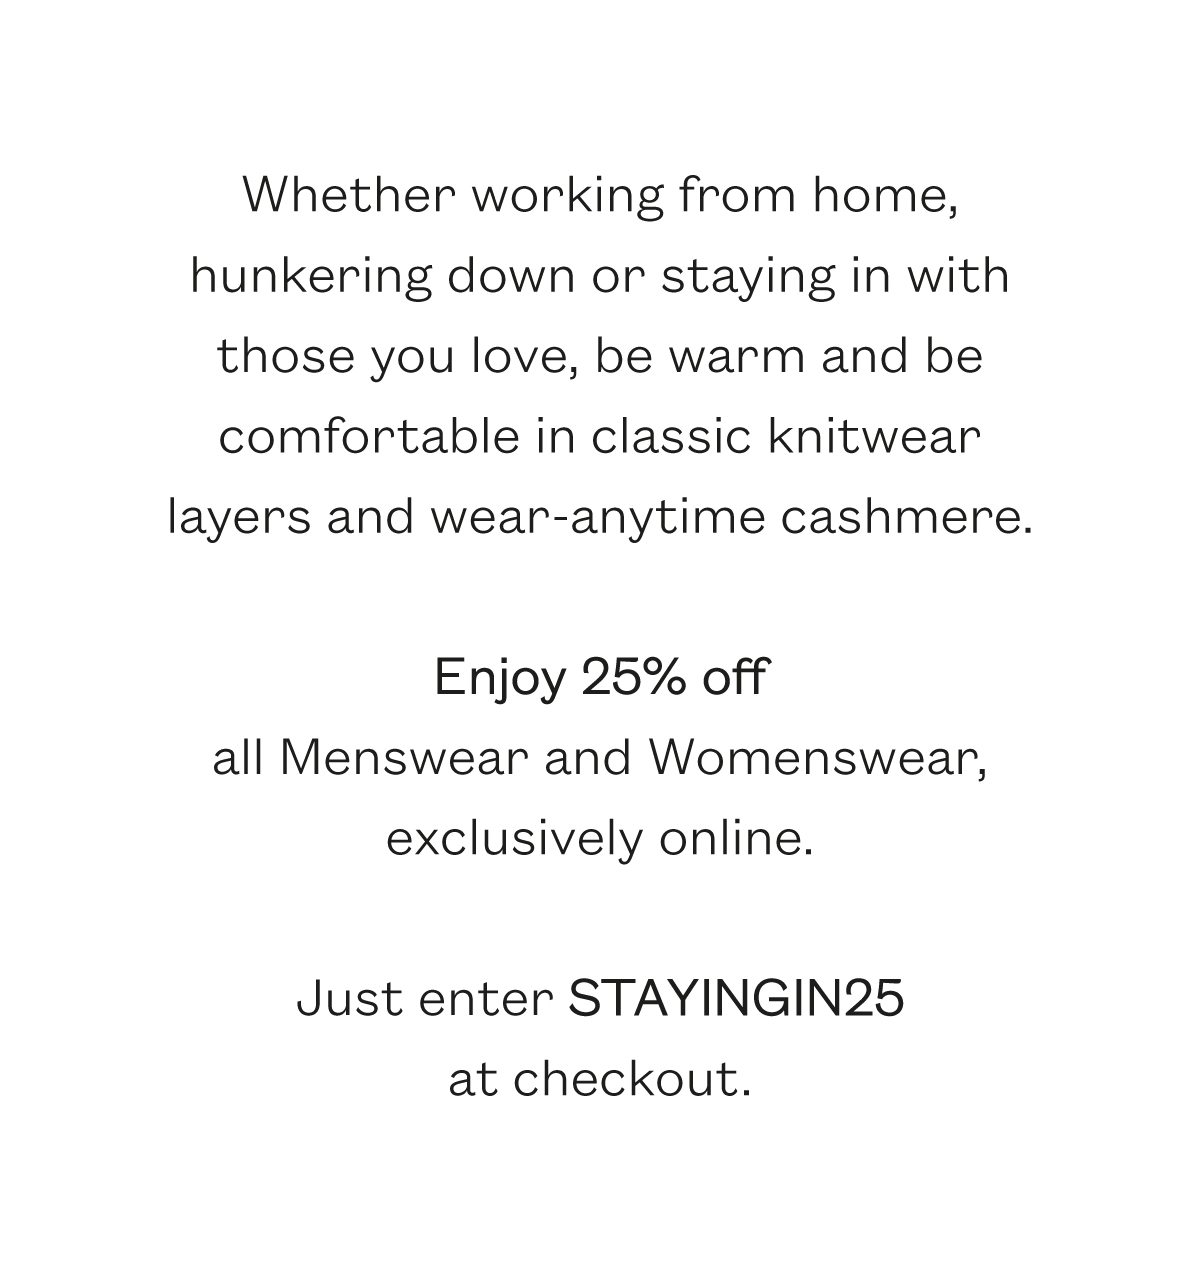 Whether working from home, hunkering down or staying in with those you love, be warm and be comfortable in classic knitwear layers and wear-anytime cashmere.    Enjoy 25% off  all Menswear and Womenswear, exclusively online.    Just enter STAYINGIN25at checkout.   Terms and Conditions. 25% discount across all lines. Not valid with any other offer.  Valid until Midnight (GMT) 3rd April 2020.